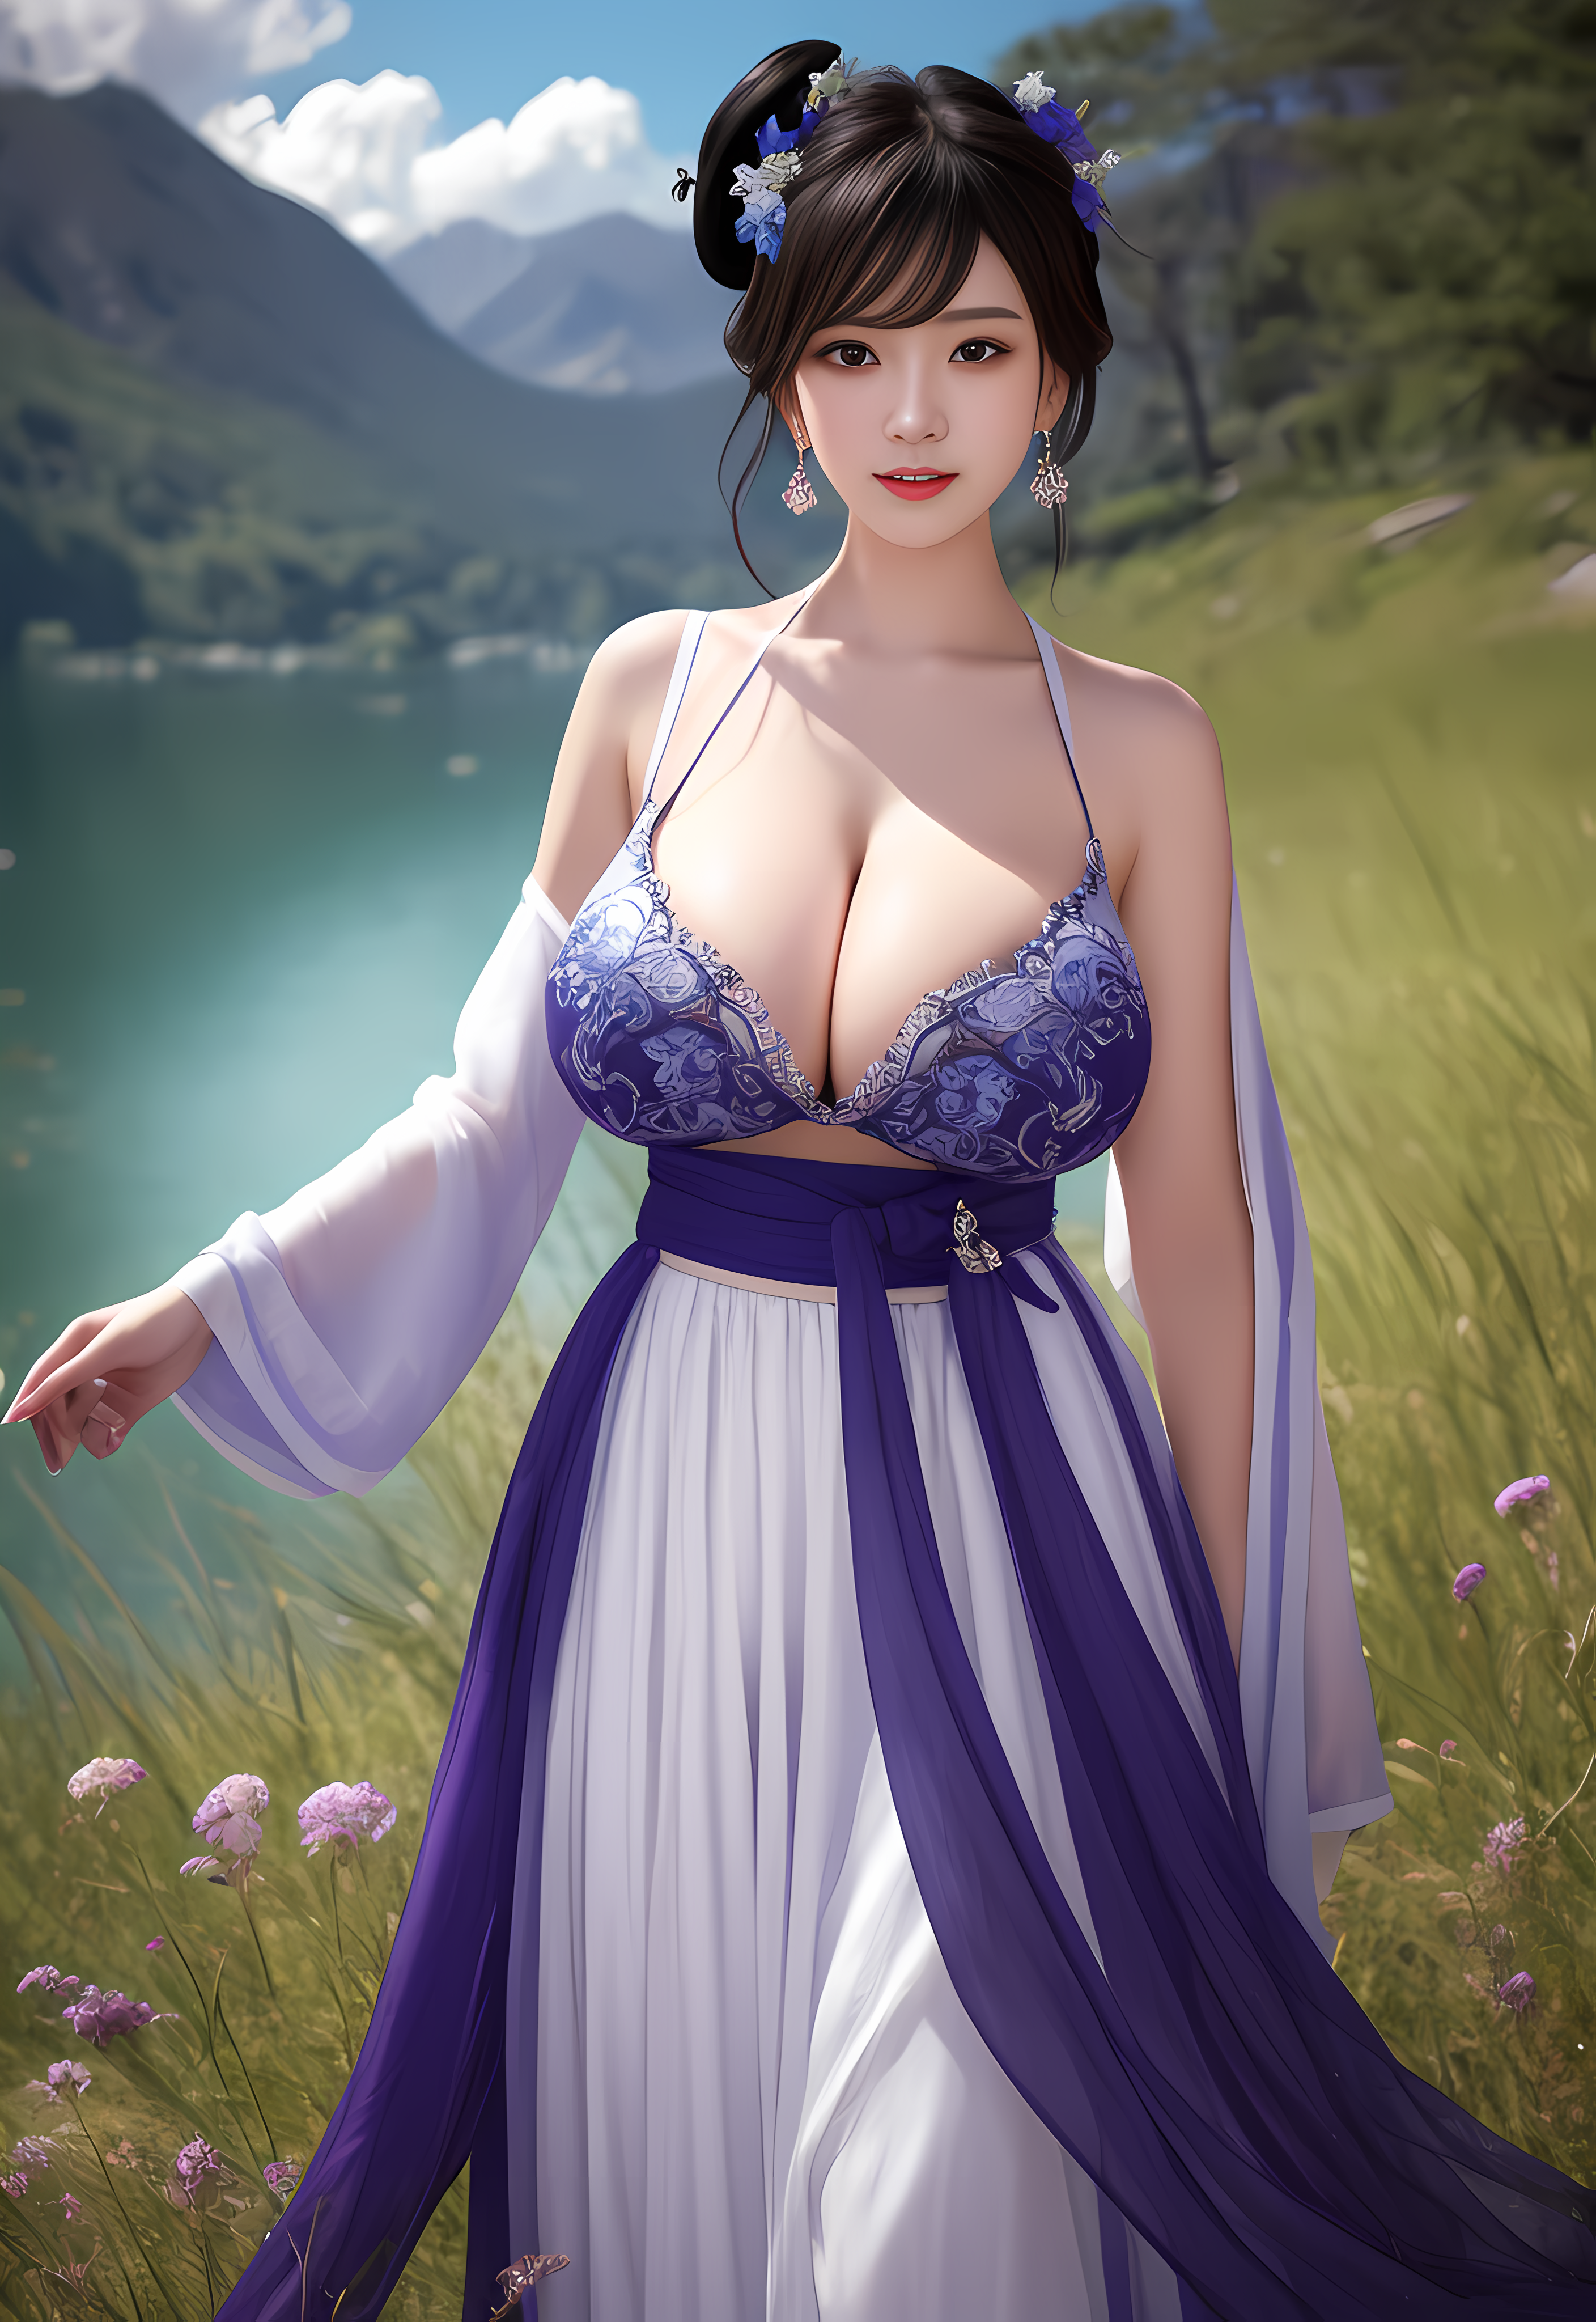 General 2816x4096 women Asian Chinese women brunette AI art Stable Diffusion dress cleavage artwork digital art Pastania portrait display looking at viewer big boobs flowers water flower in hair